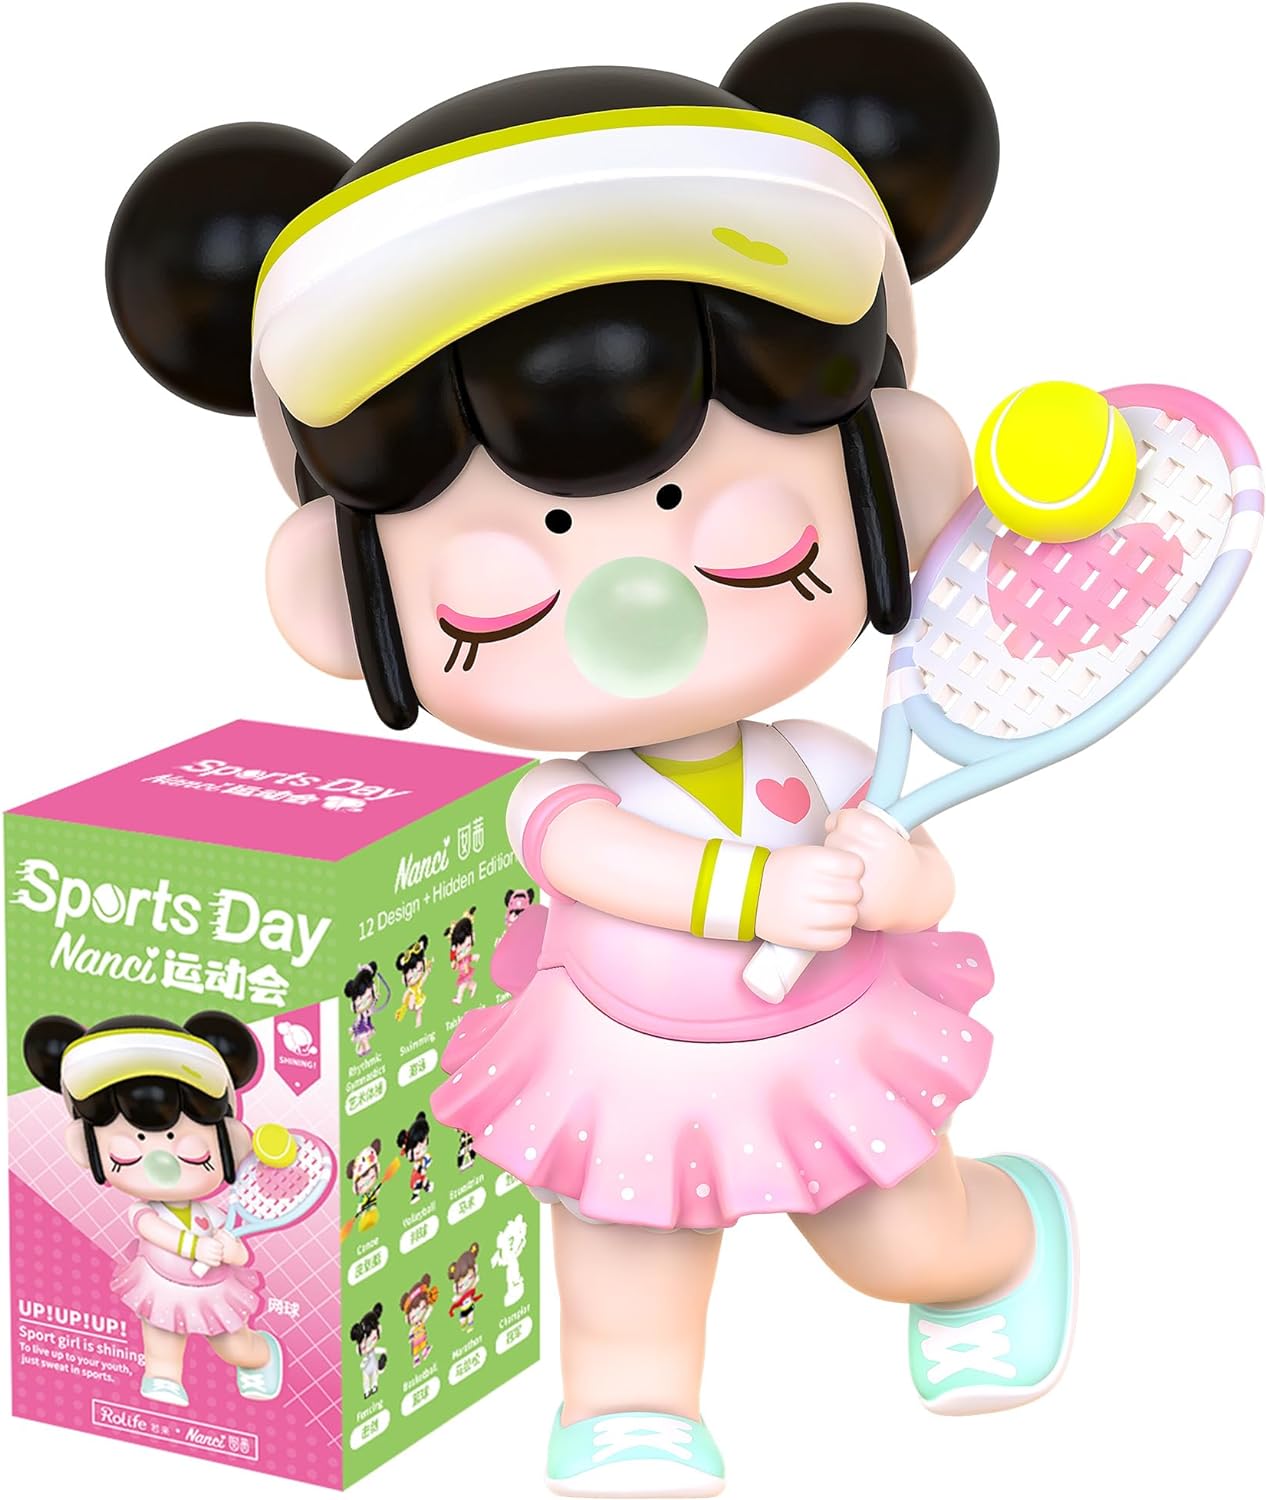 Rolife Nanci Blind Box-Sports Day-Cute Action Figure-Kawaii Figures Blind Bags Creative Gift for Girls and Women